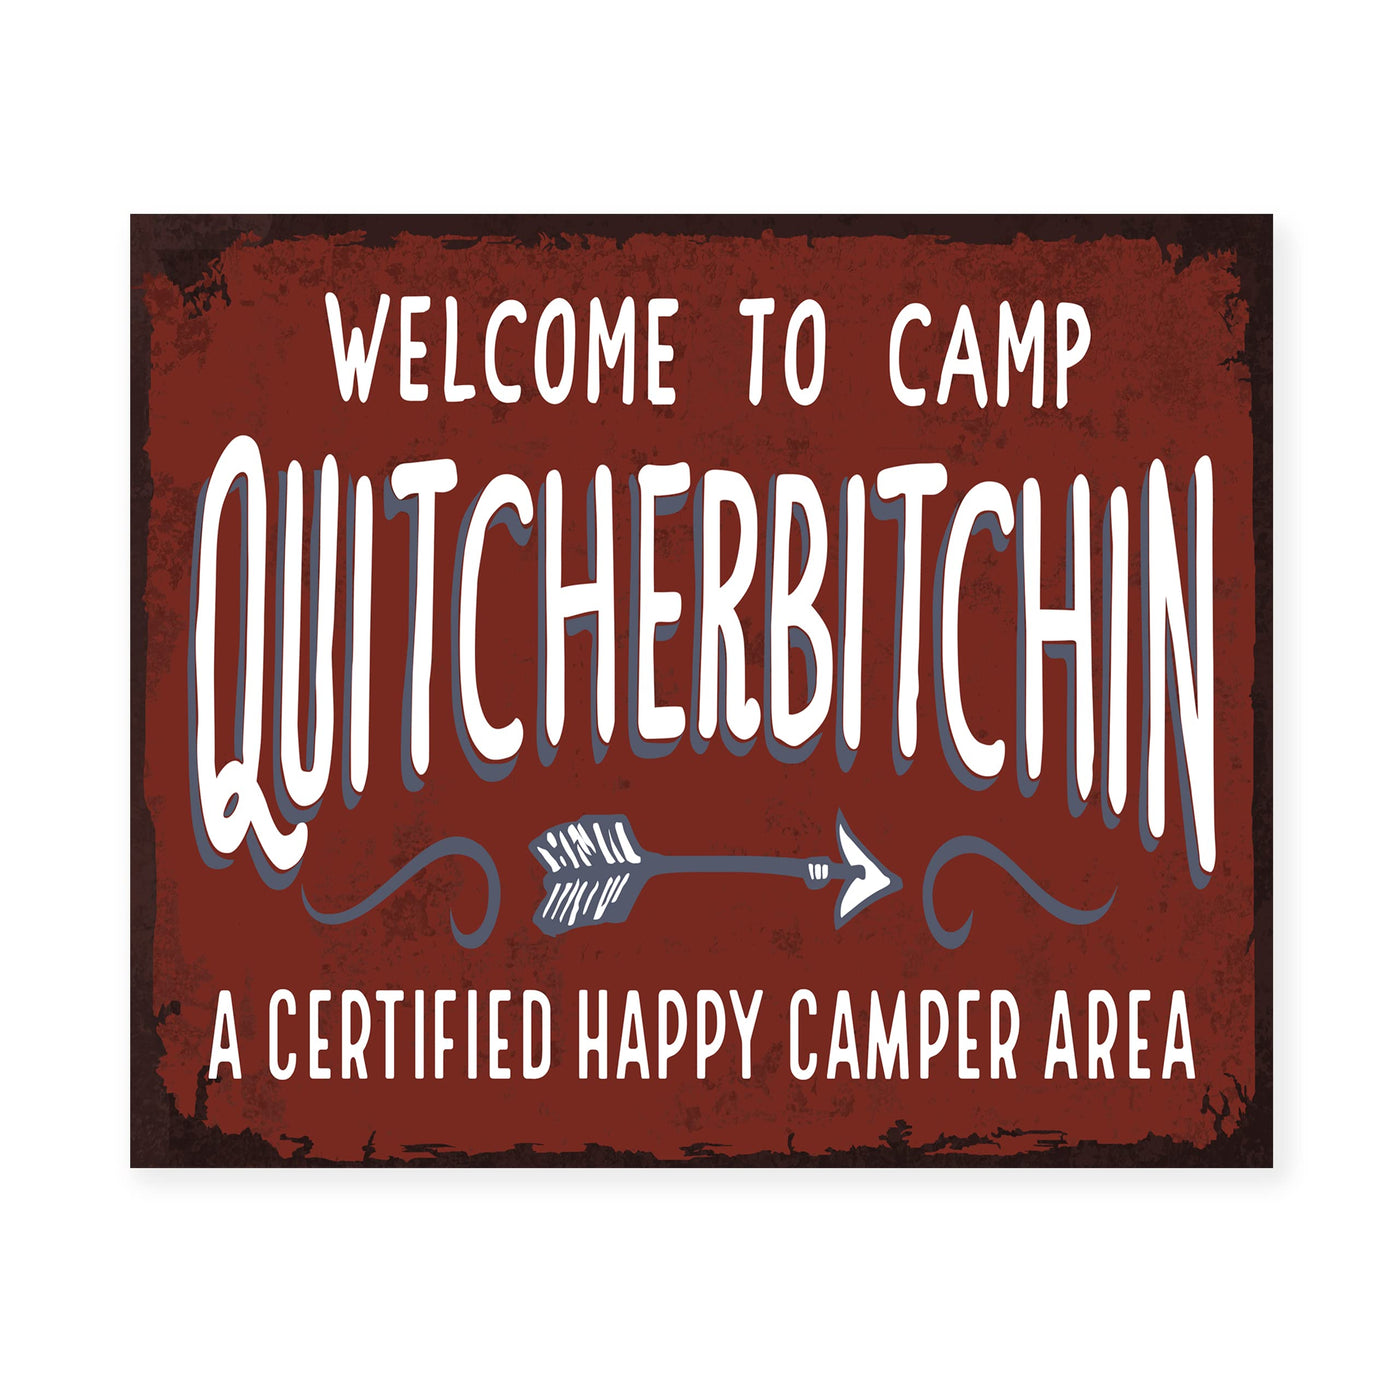 Welcome to Camp Quitcherbitchin-Funny Cabin & Lodge Wall Art Sign -10 x 8" Rustic Great Outdoors Print -Ready to Frame. Home-Lake-Beach House-Deck-Patio Decor! Fun Gift! Printed on Photo Paper.